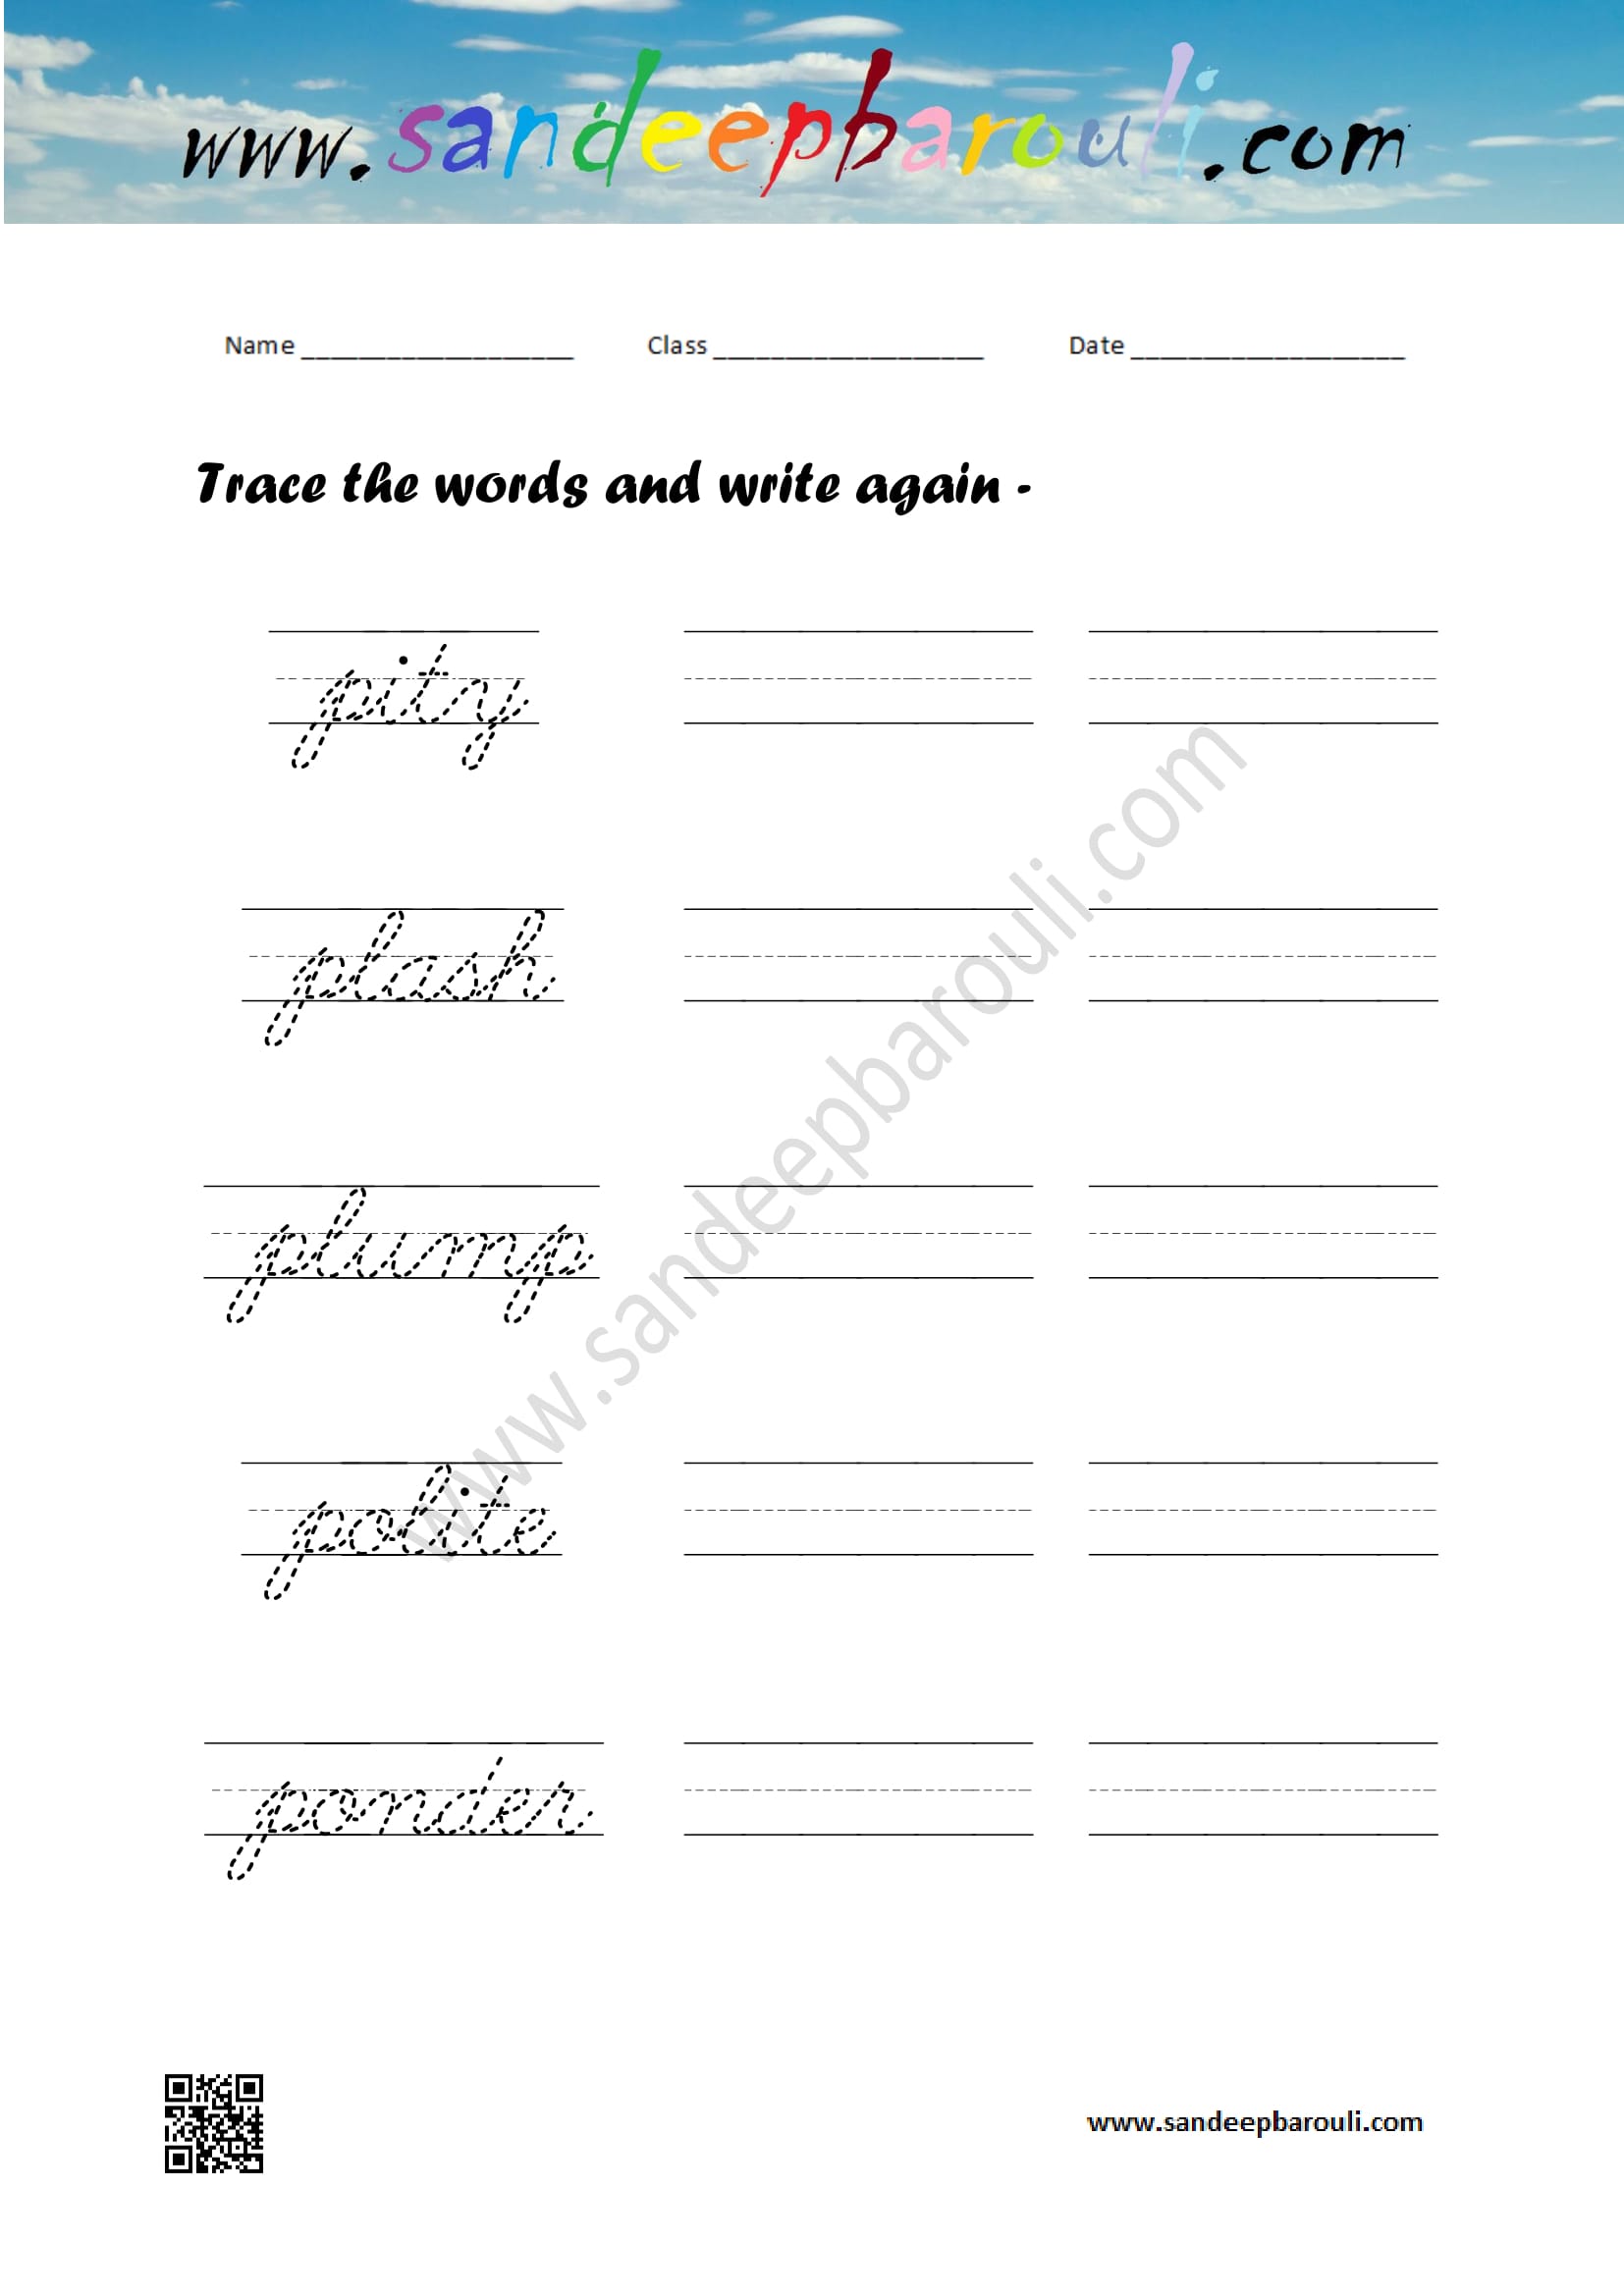 Cursive writing worksheet – trace the words and write again (102)